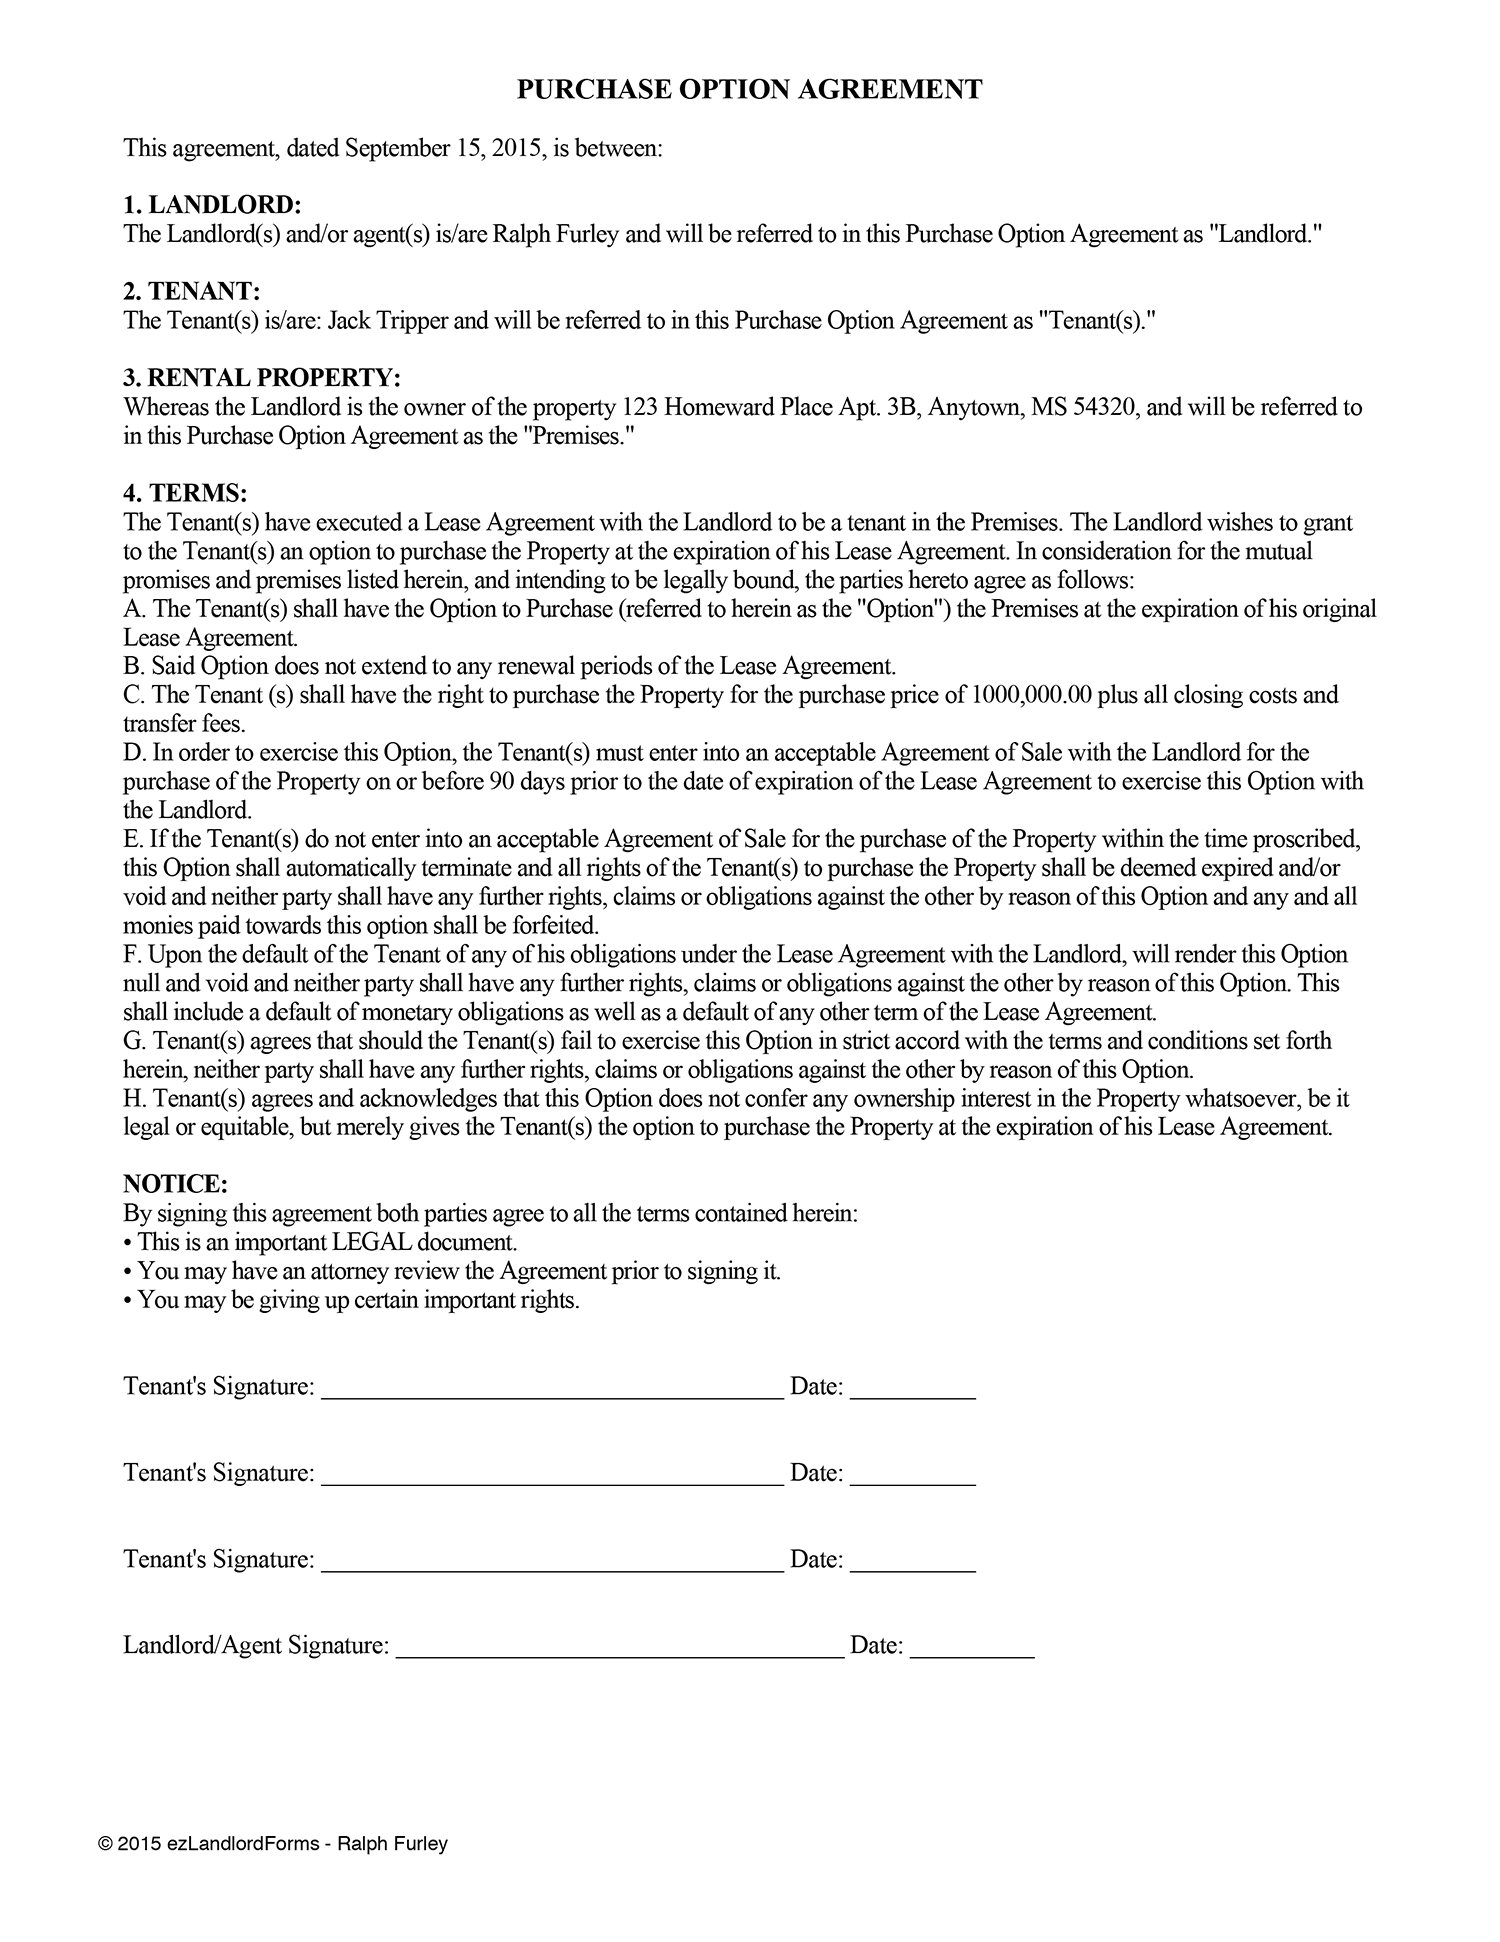 Lease And Purchase Agreement Lease Option Agreement Lease Purchase Option Ezlandlordforms